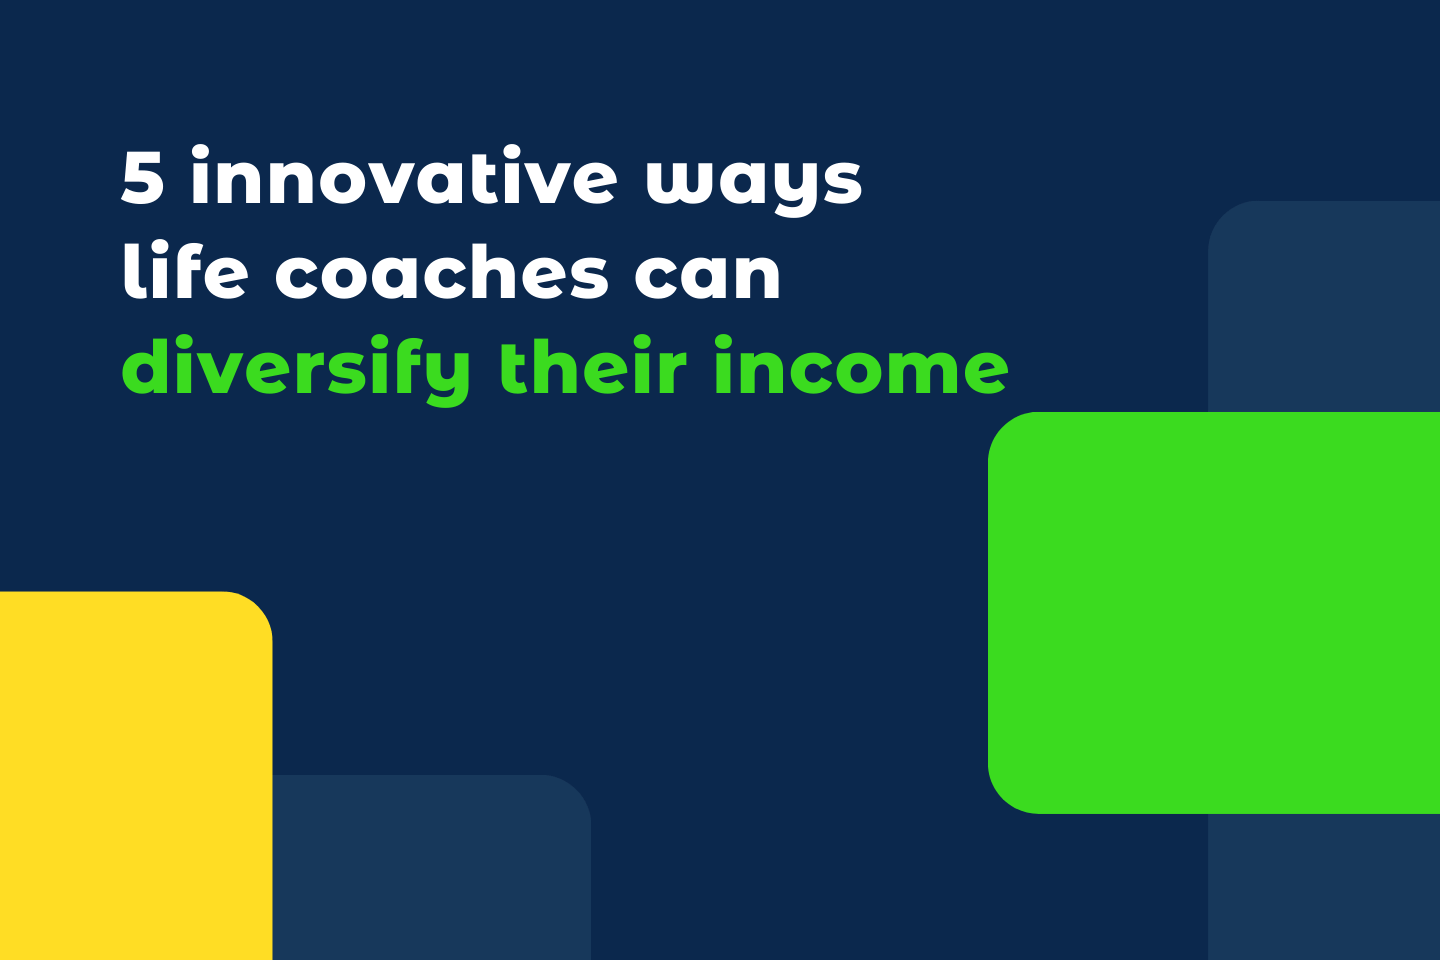 5 innovative ways life coaches can diversify their income